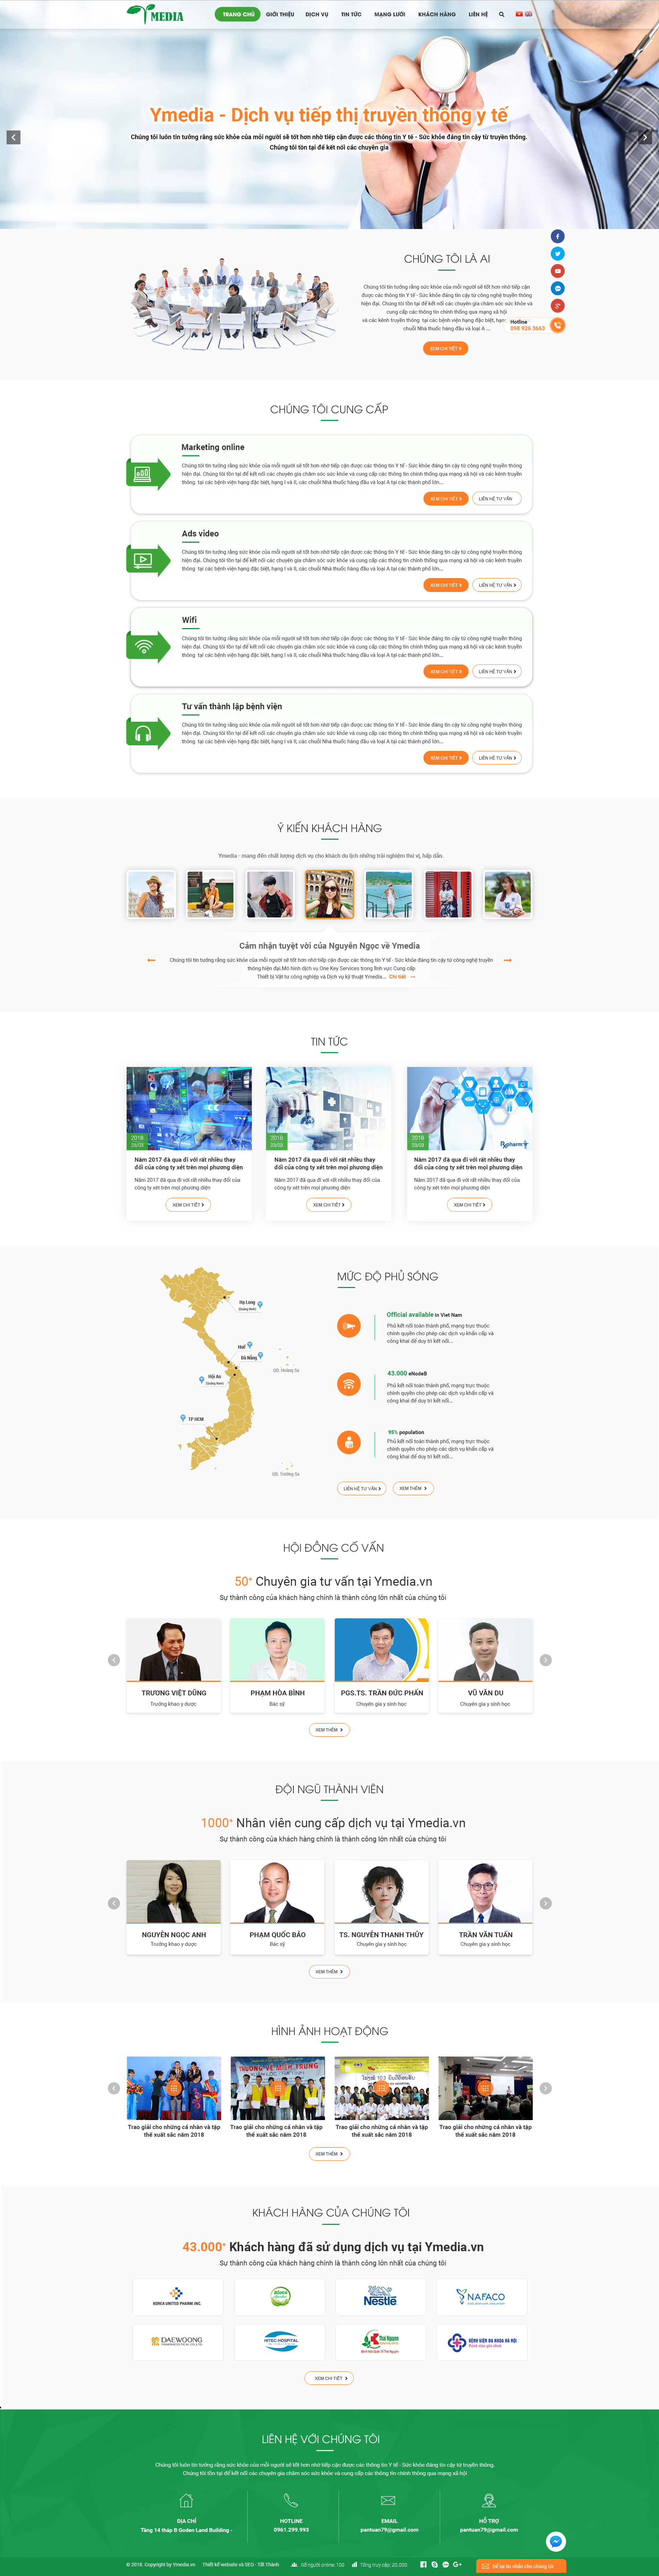 Giao diện website dịch vụ Ymedia.vn